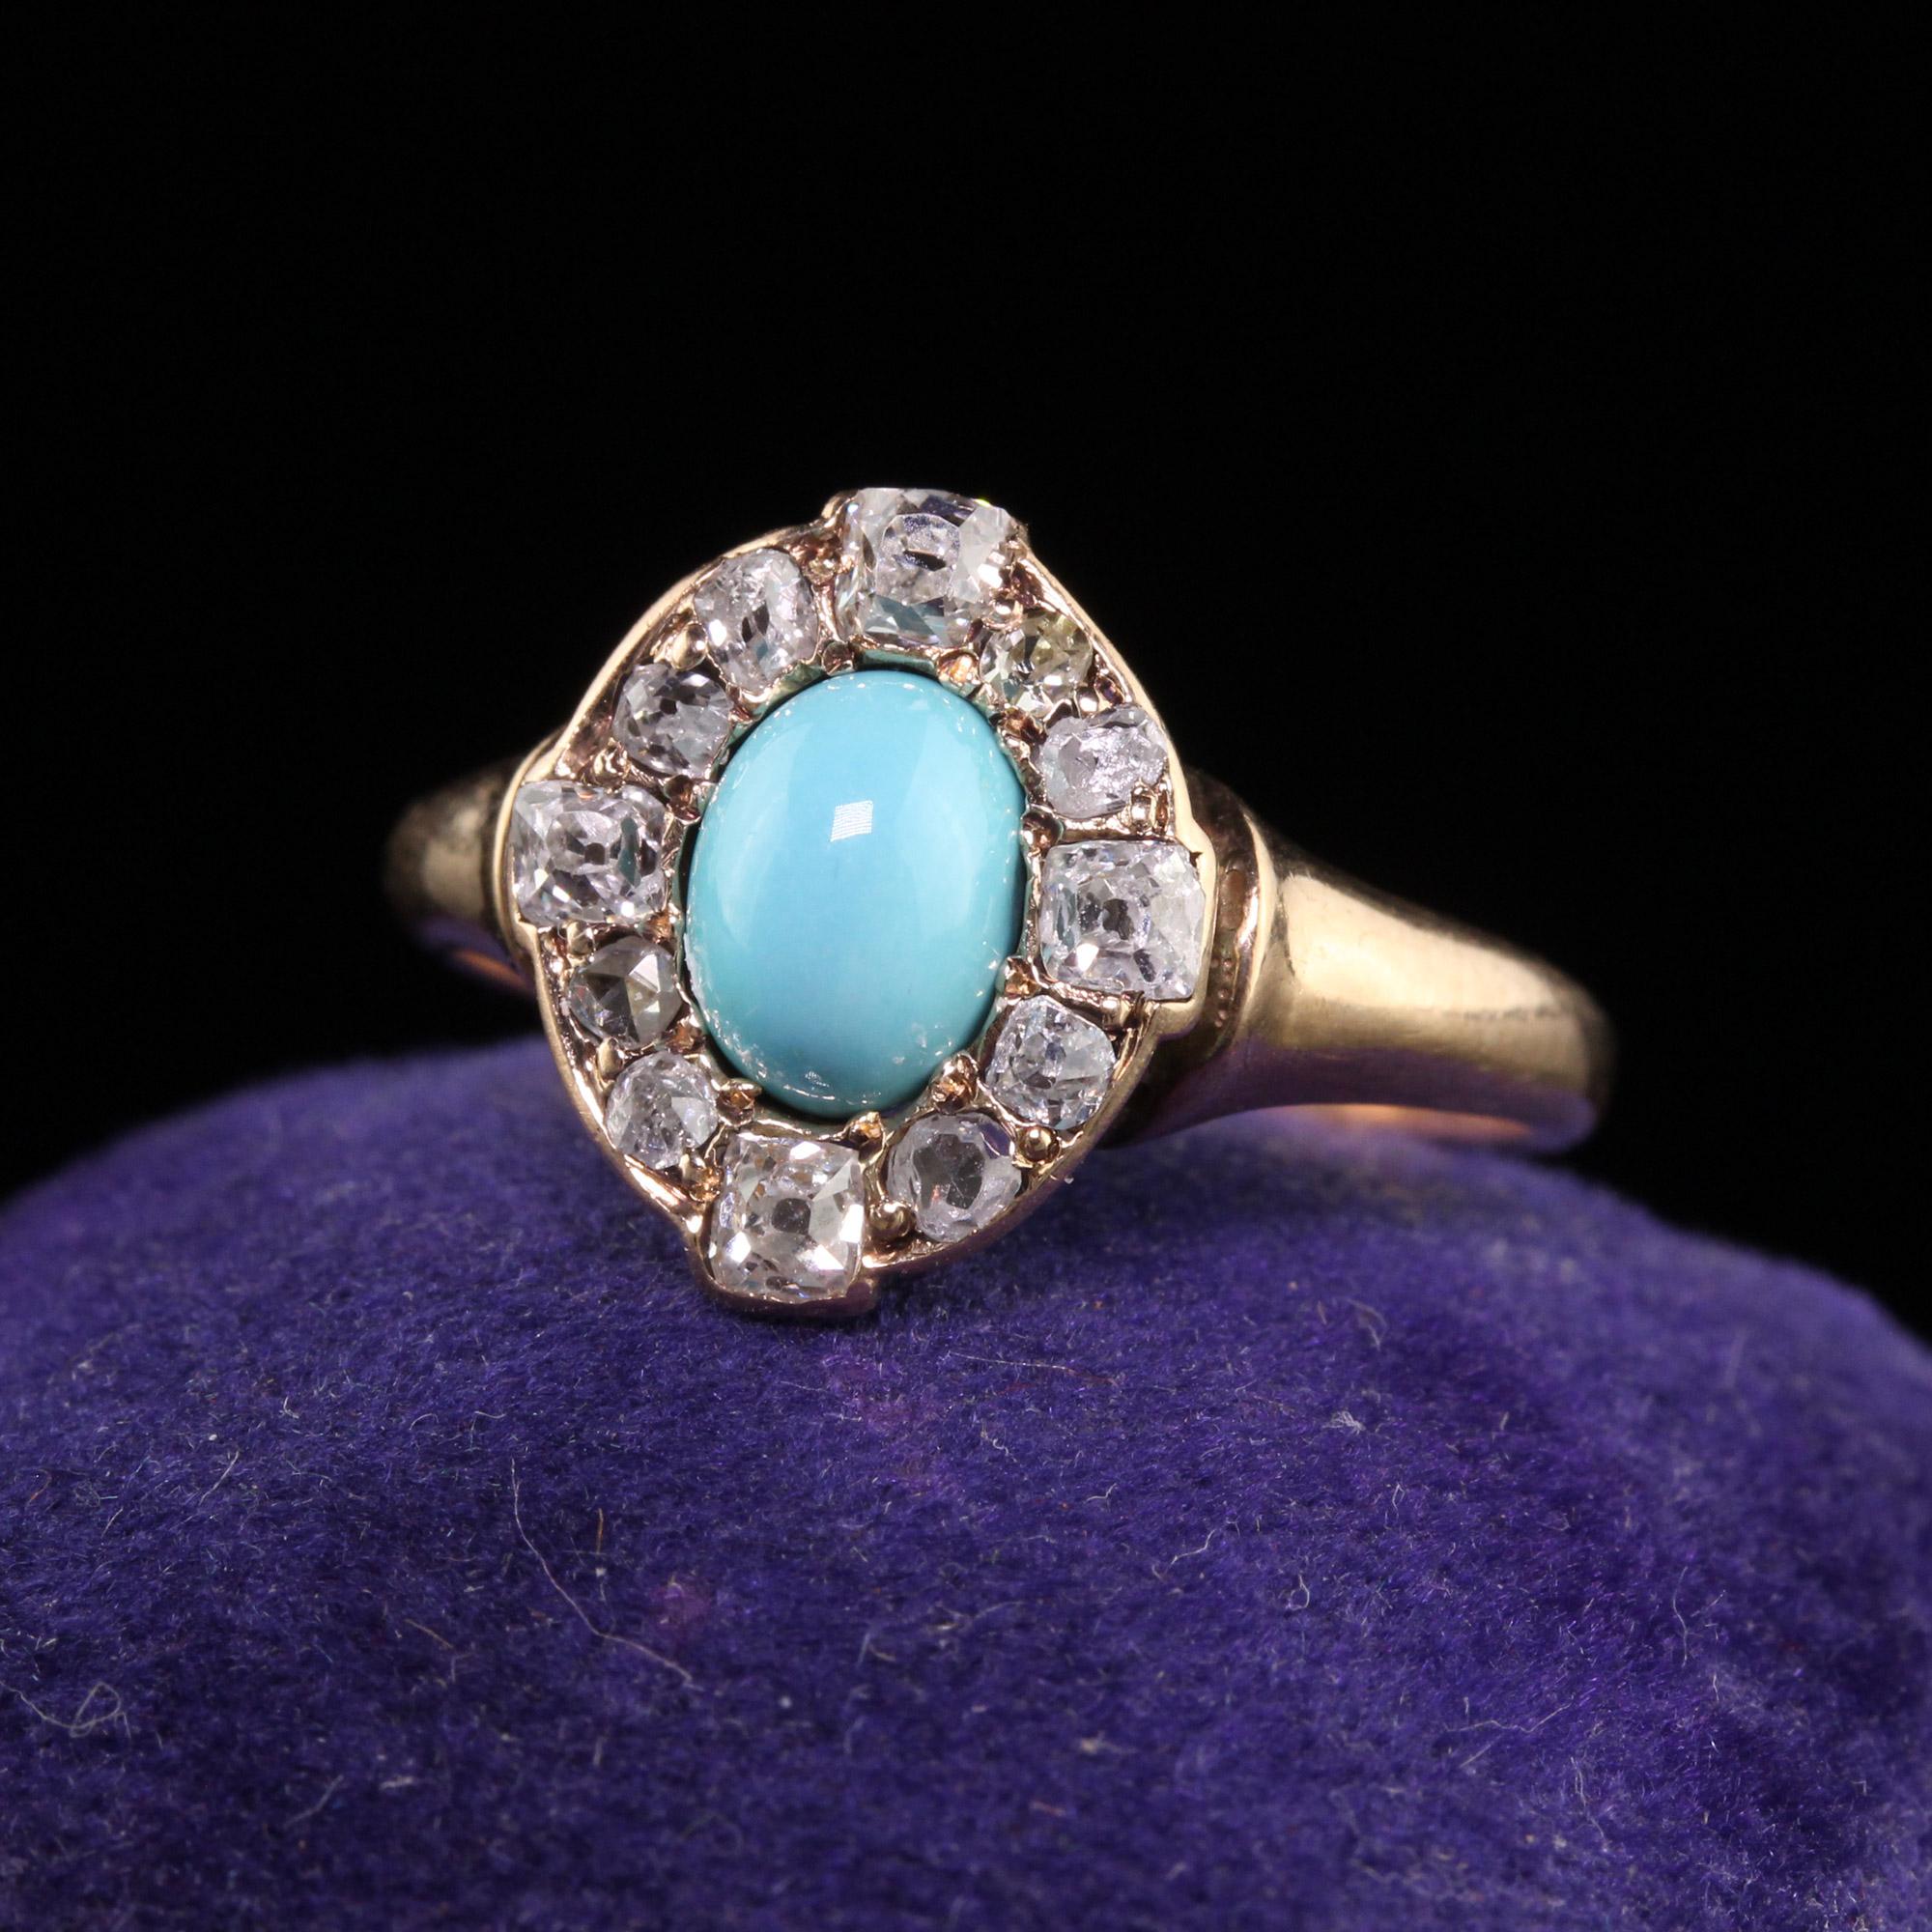 Beautiful Antique Victorian 14K Yellow Gold Cabochon Turquoise Old Mine Cut Diamond Ring. This gorgeous ring is crafted in 14k yellow gold. The center holds a cabochon turquoise and is surrounded by custom hand cut old mine diamonds and has a